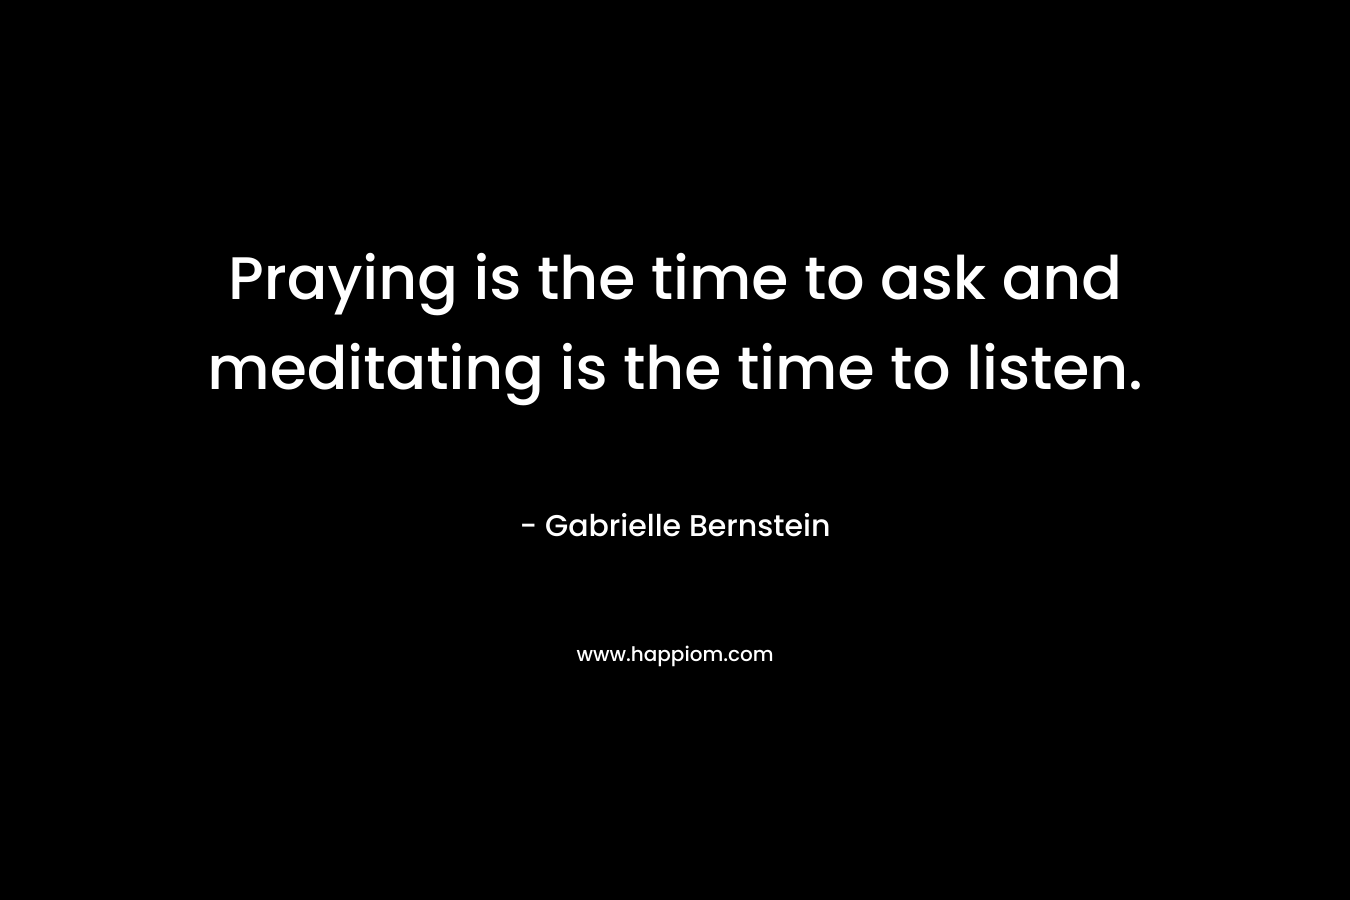 Praying is the time to ask and meditating is the time to listen. – Gabrielle Bernstein